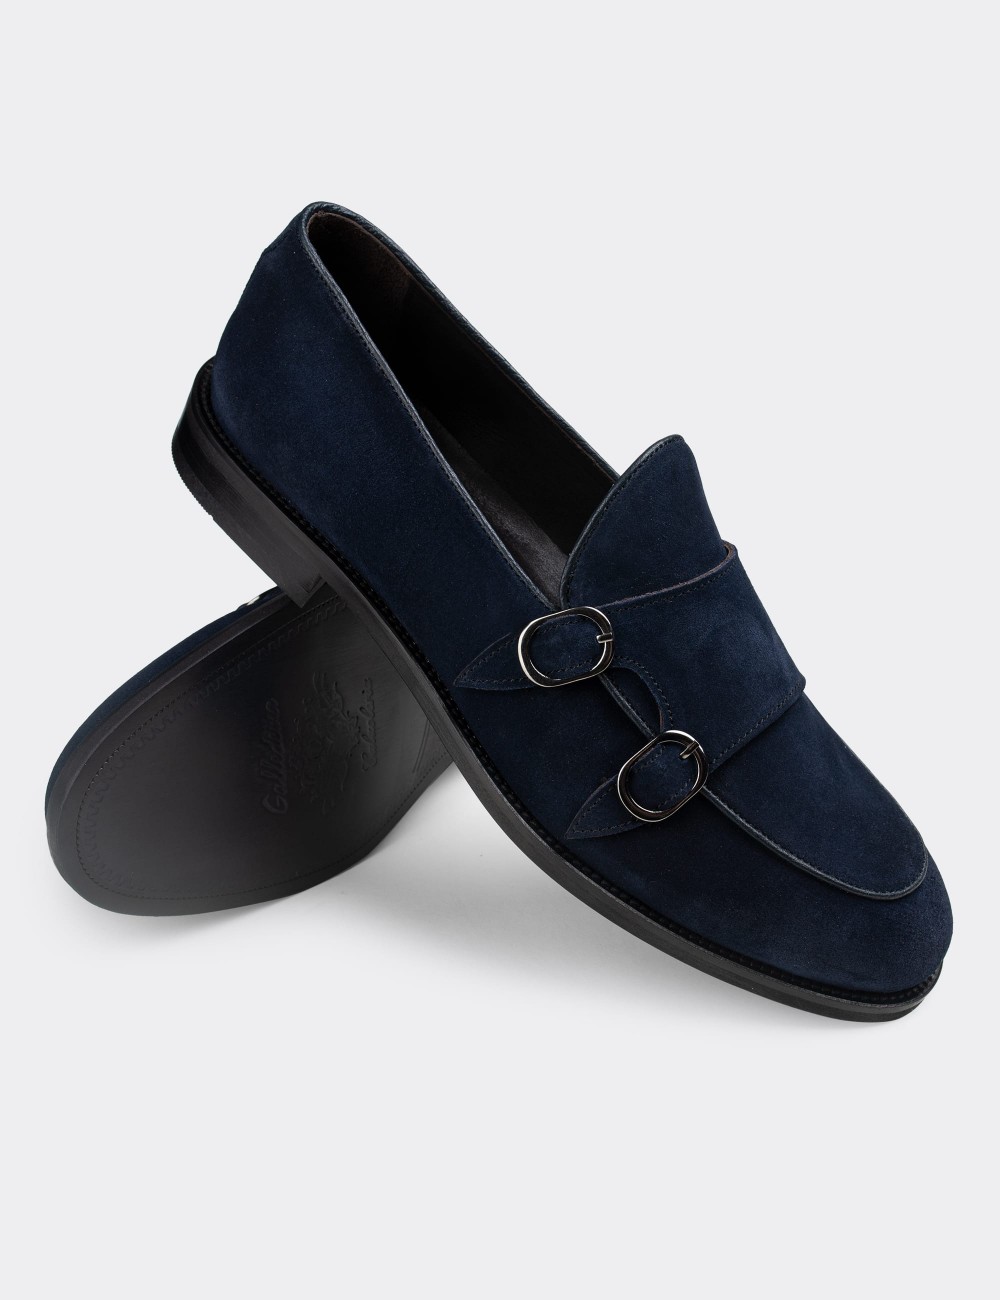 Blue Suede Leather Double Monk-Strap Loafers - 01844MMVIN01